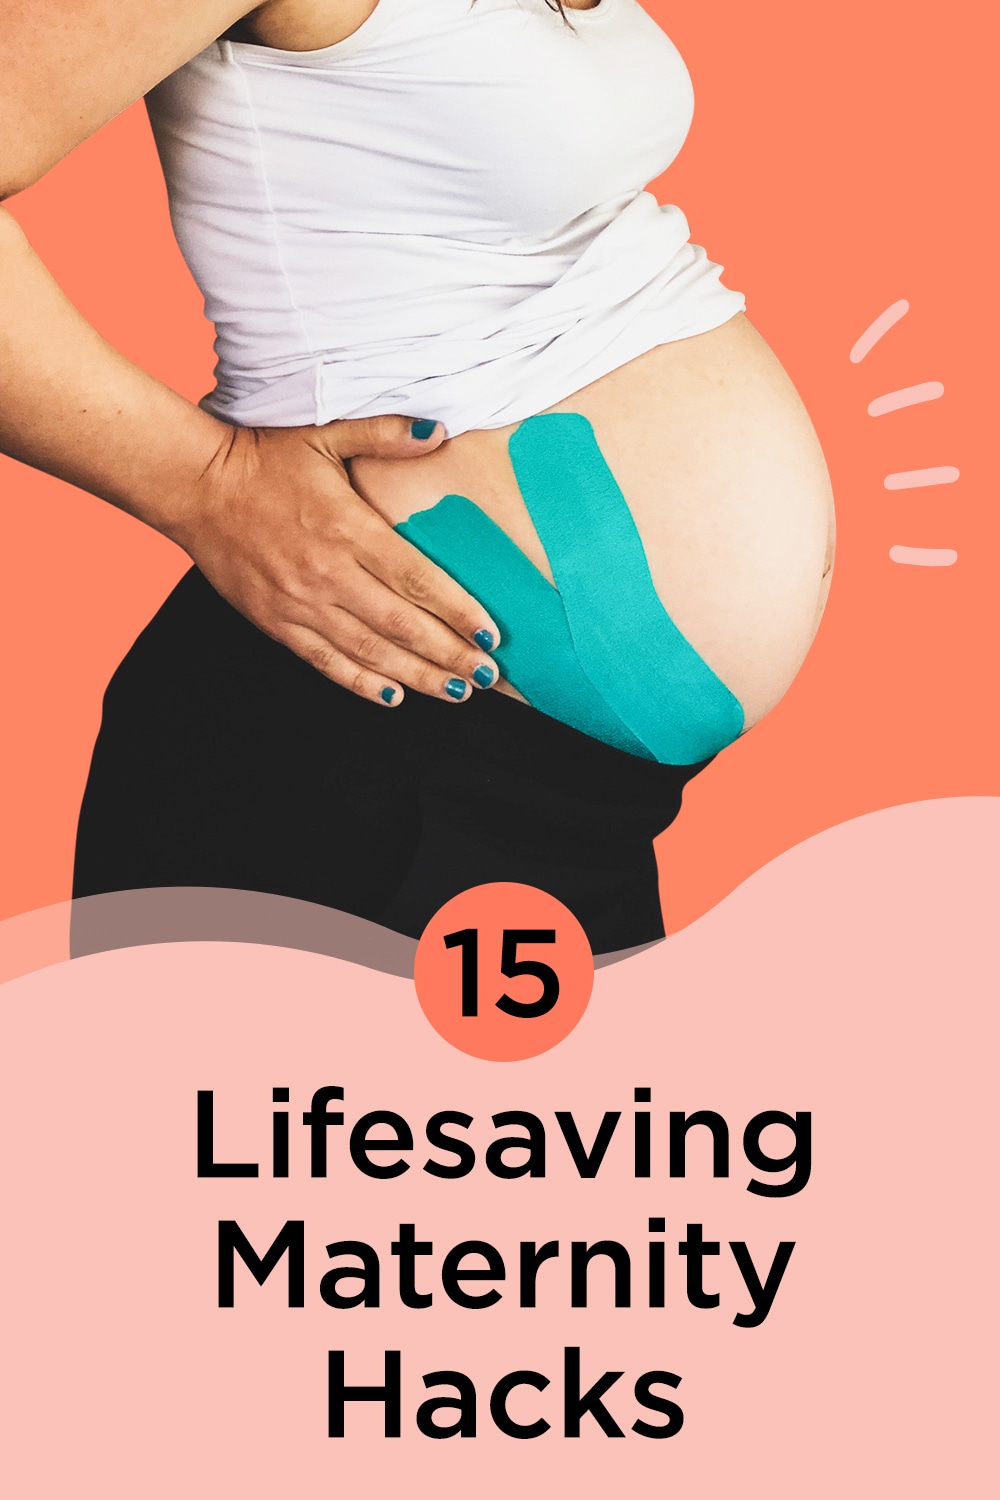 The ultimate pregnancy hack! Staying hydrated is a breeze with BellyBo